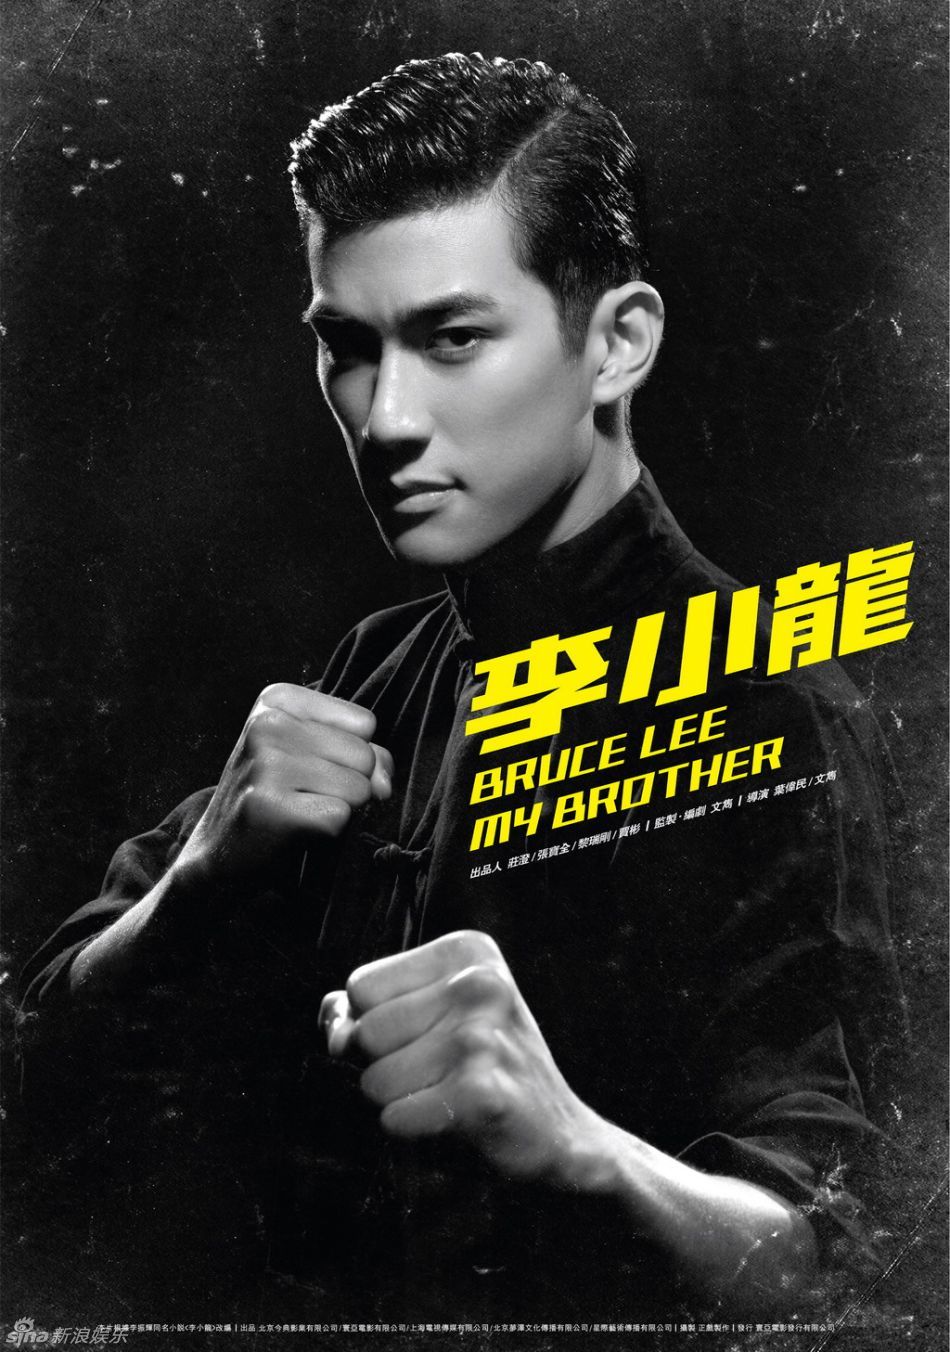 Bruce Lee My Brother (2010) Bruce%2BLee%2BMy%2BBrother%2BPoster